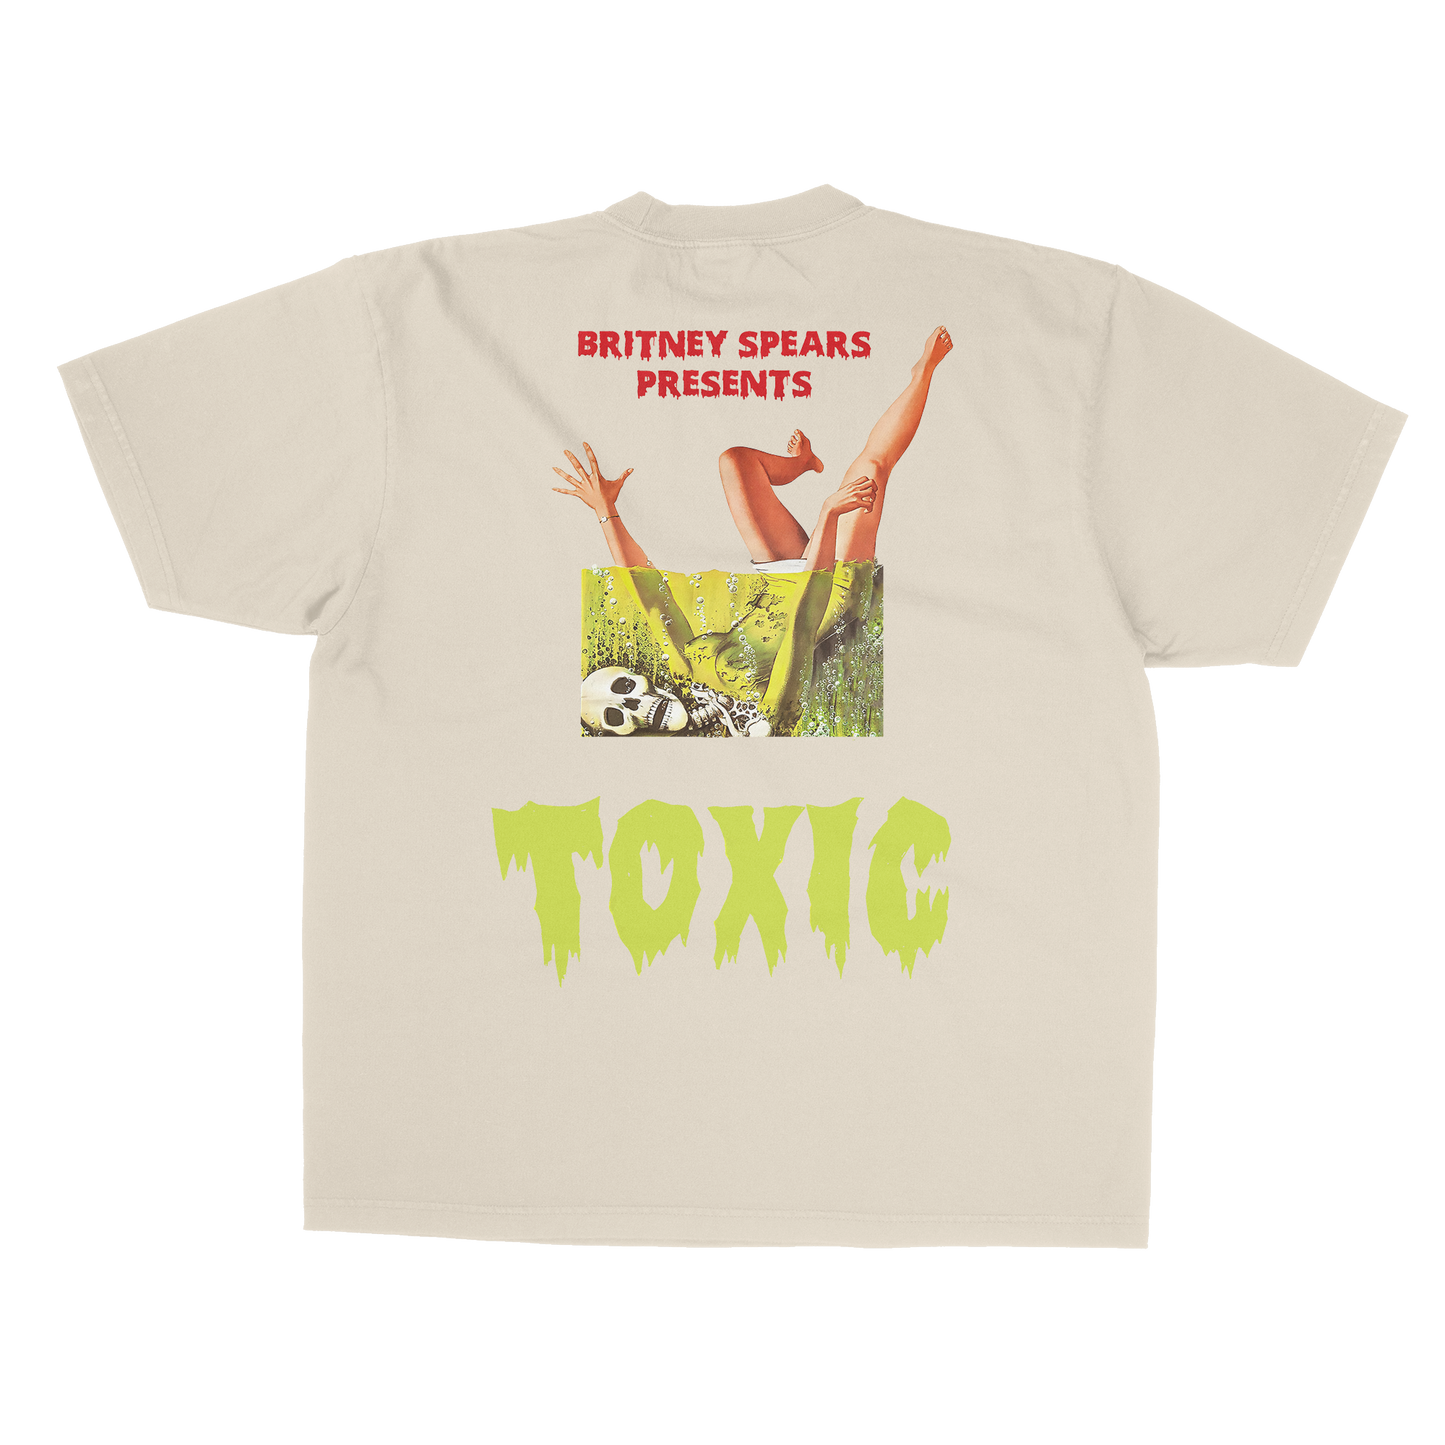 BRITNEY TOXIC HORROR STYLE GRAPHIC TEE - FRONT & BACK PRINT